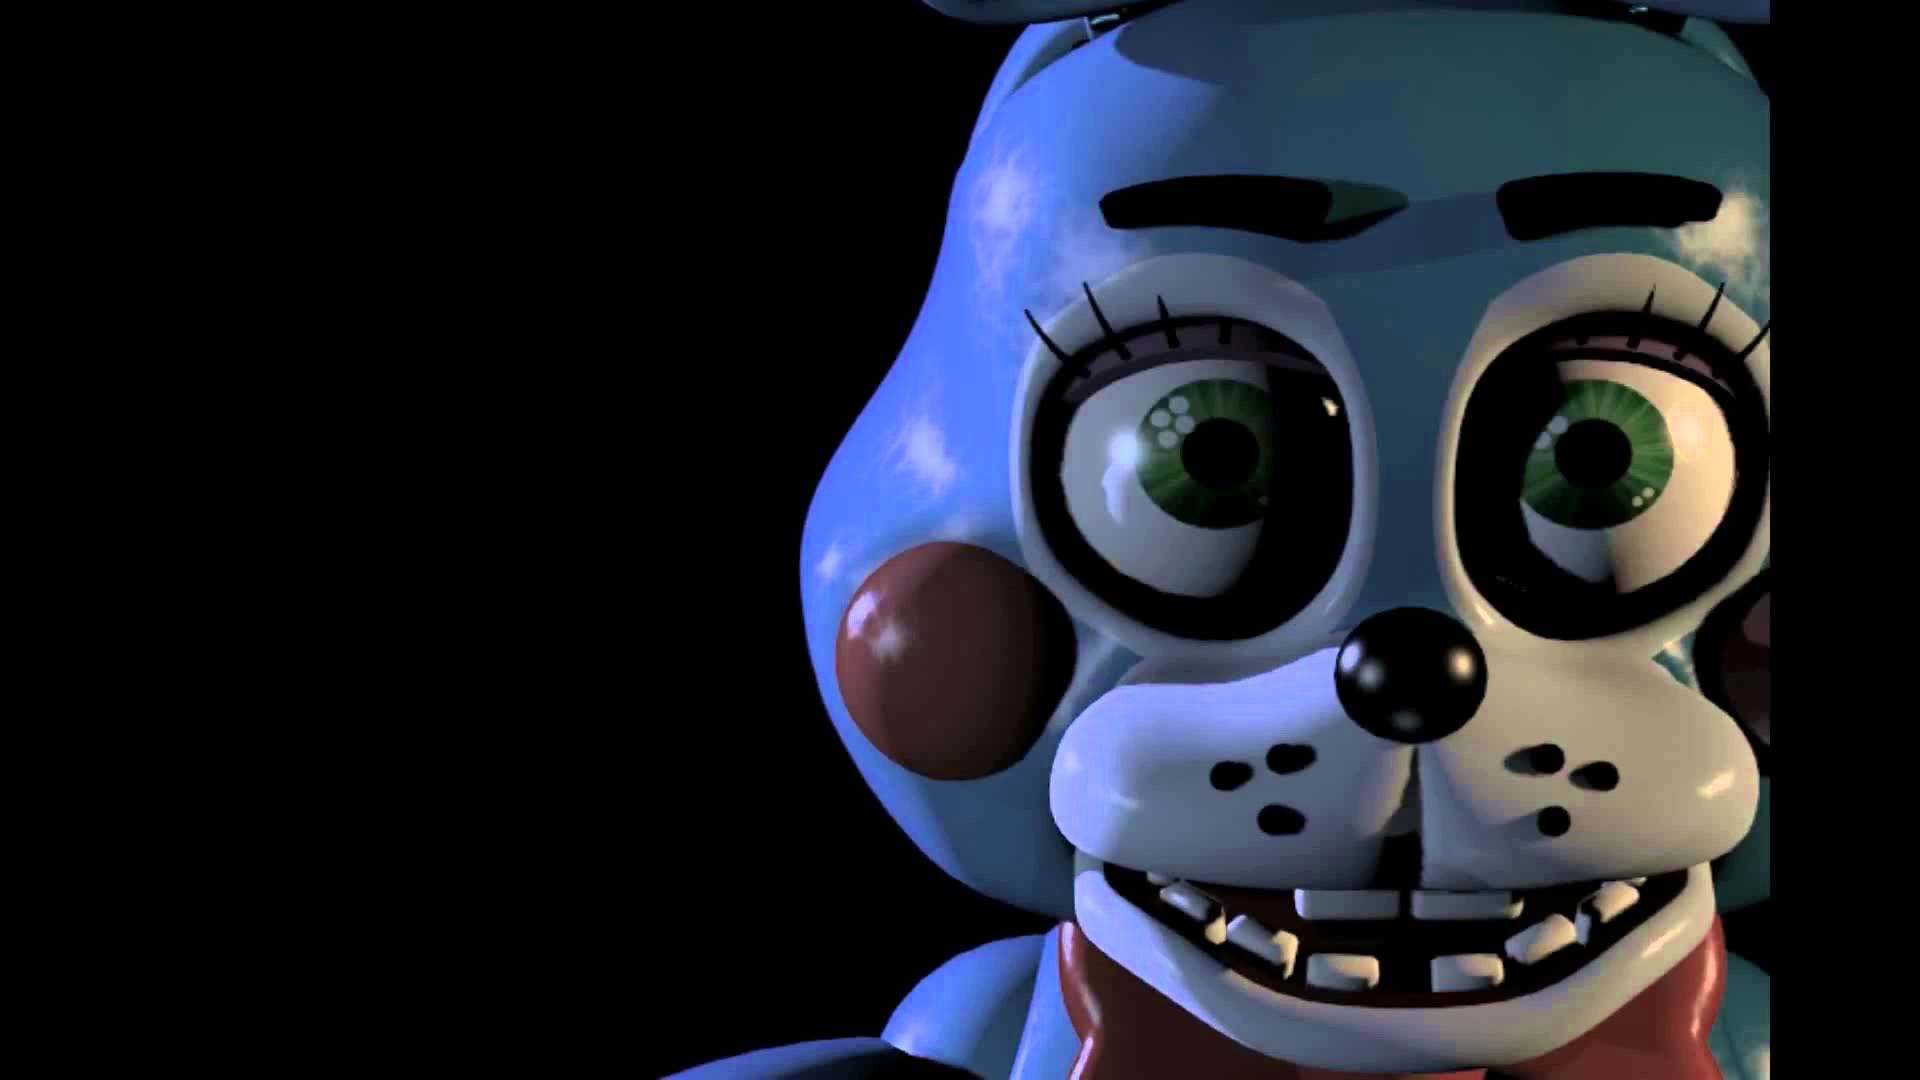 1920x1080 Five Nights at Freddy's 2 | Online Games | Tus juegos online .